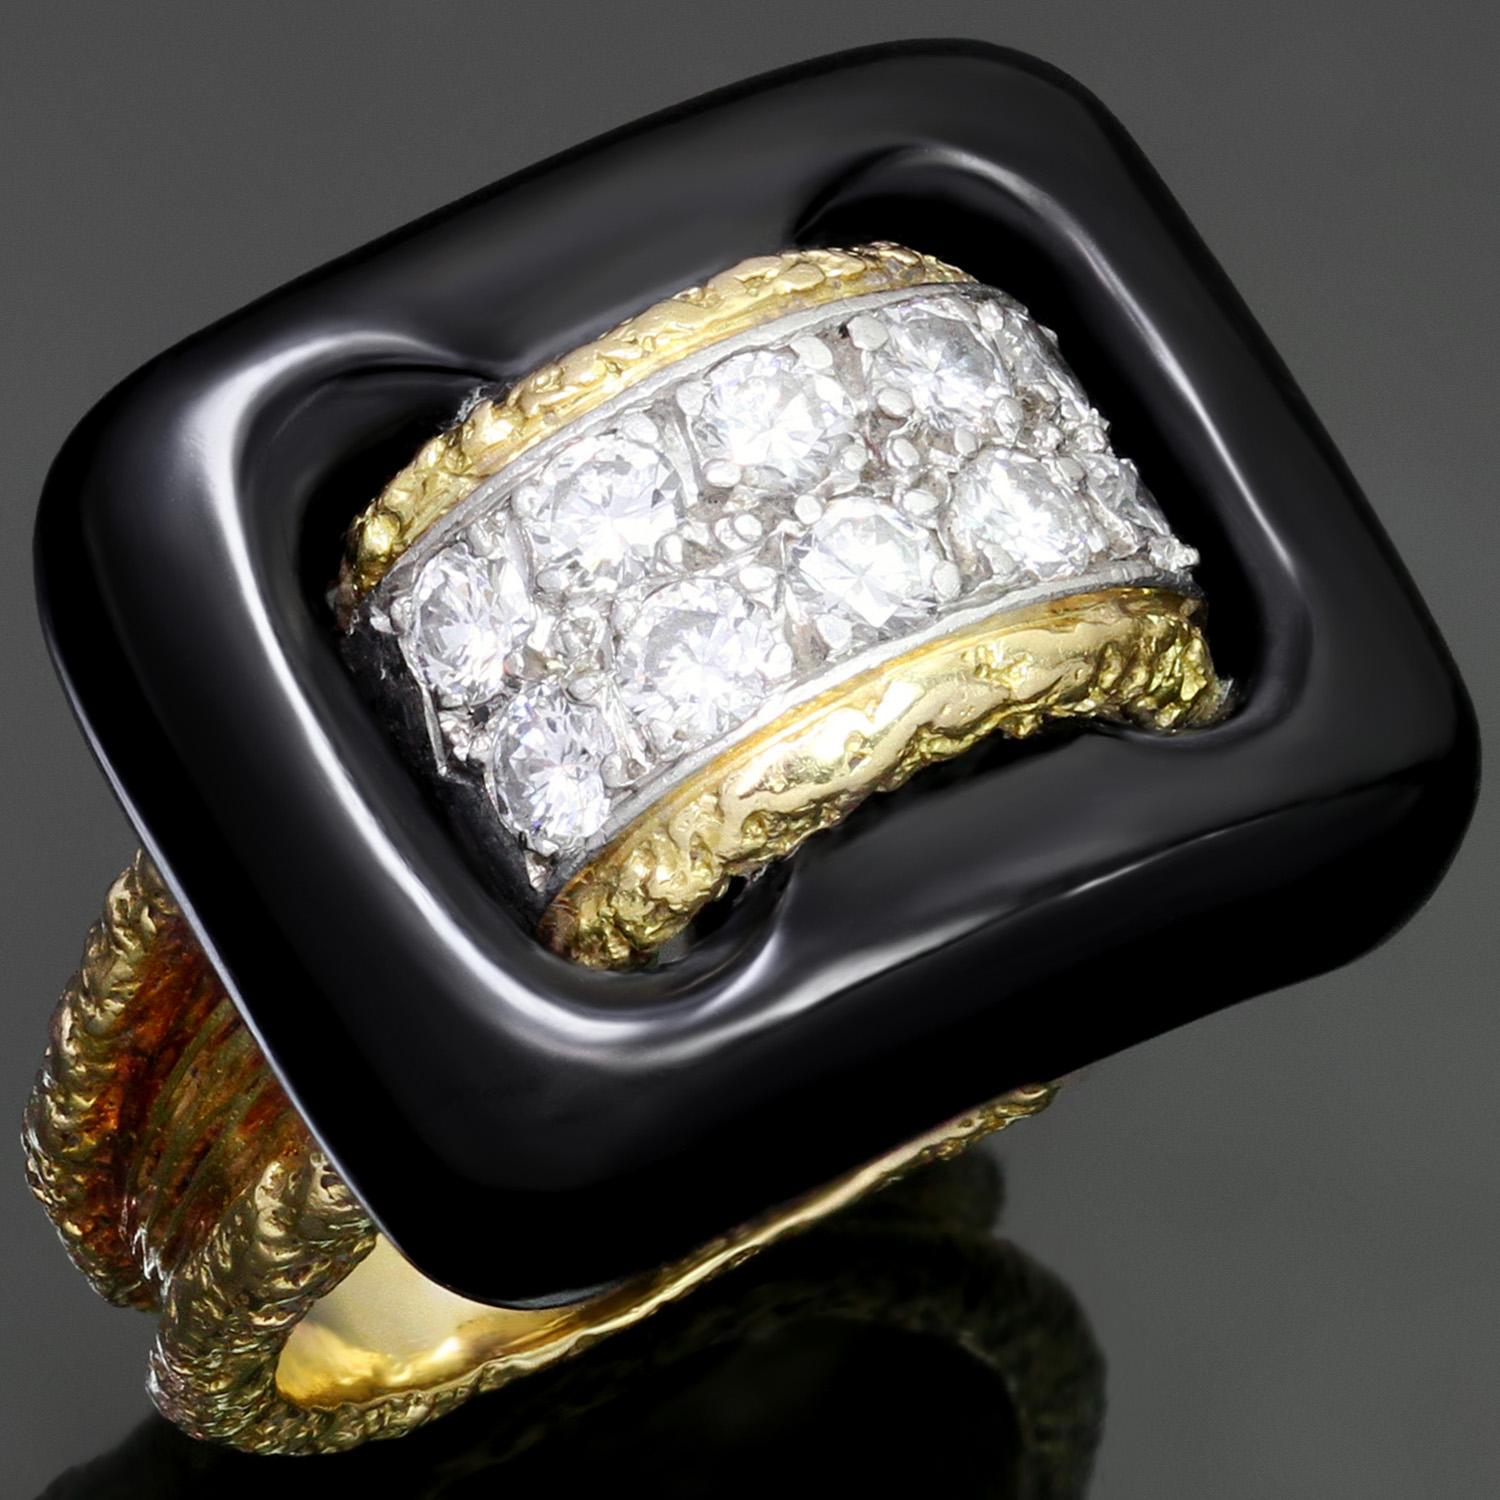 This stunning retro Van Cleef & Arpels ring is crafted in 18k textured yellow gold and beautifully complemented with carved black onyx and brilliant-cut round diamonds of an estimated 0.60 carats. Made in France circa 1960s. Measurements: 0.62